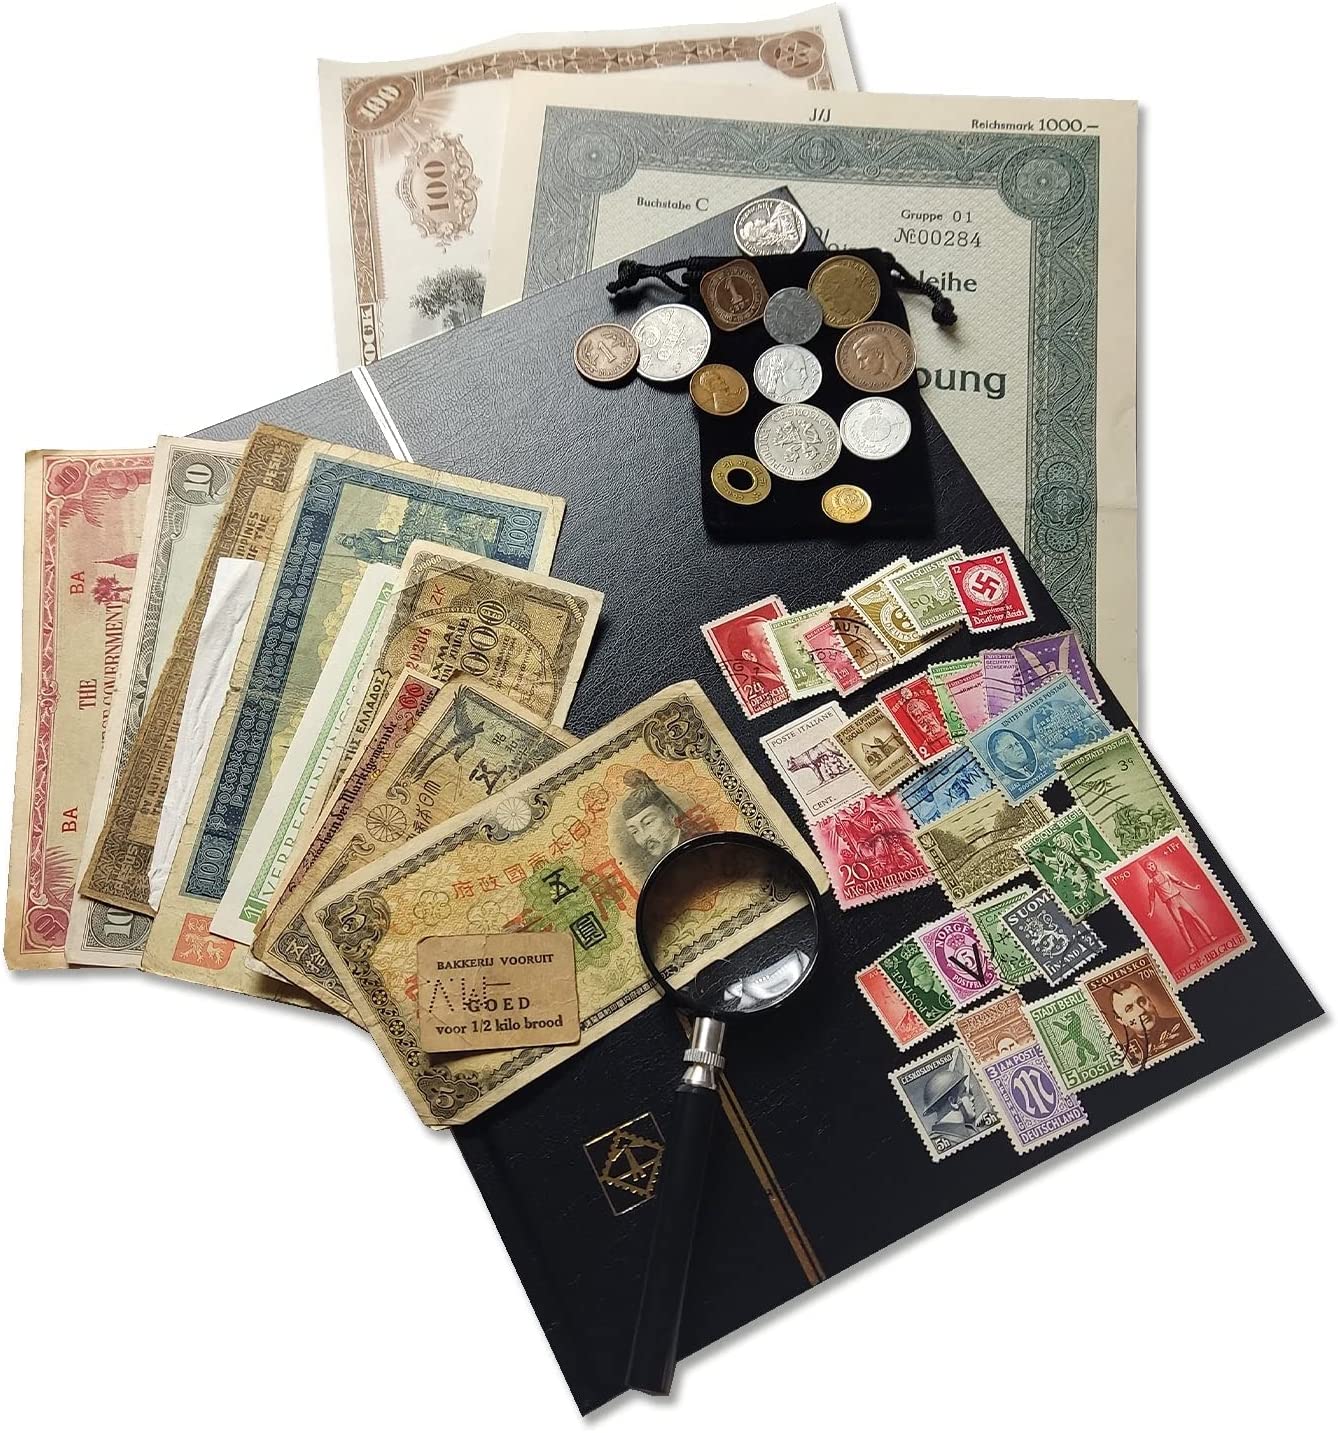 WW2 World Currency – 57 Original Allied & Axis Powers Banknotes, Coins, Stamps and Bonds + Album to Build Your Foreign Currency Collection - Coin Collection Supplies and Certificate of Authenticity